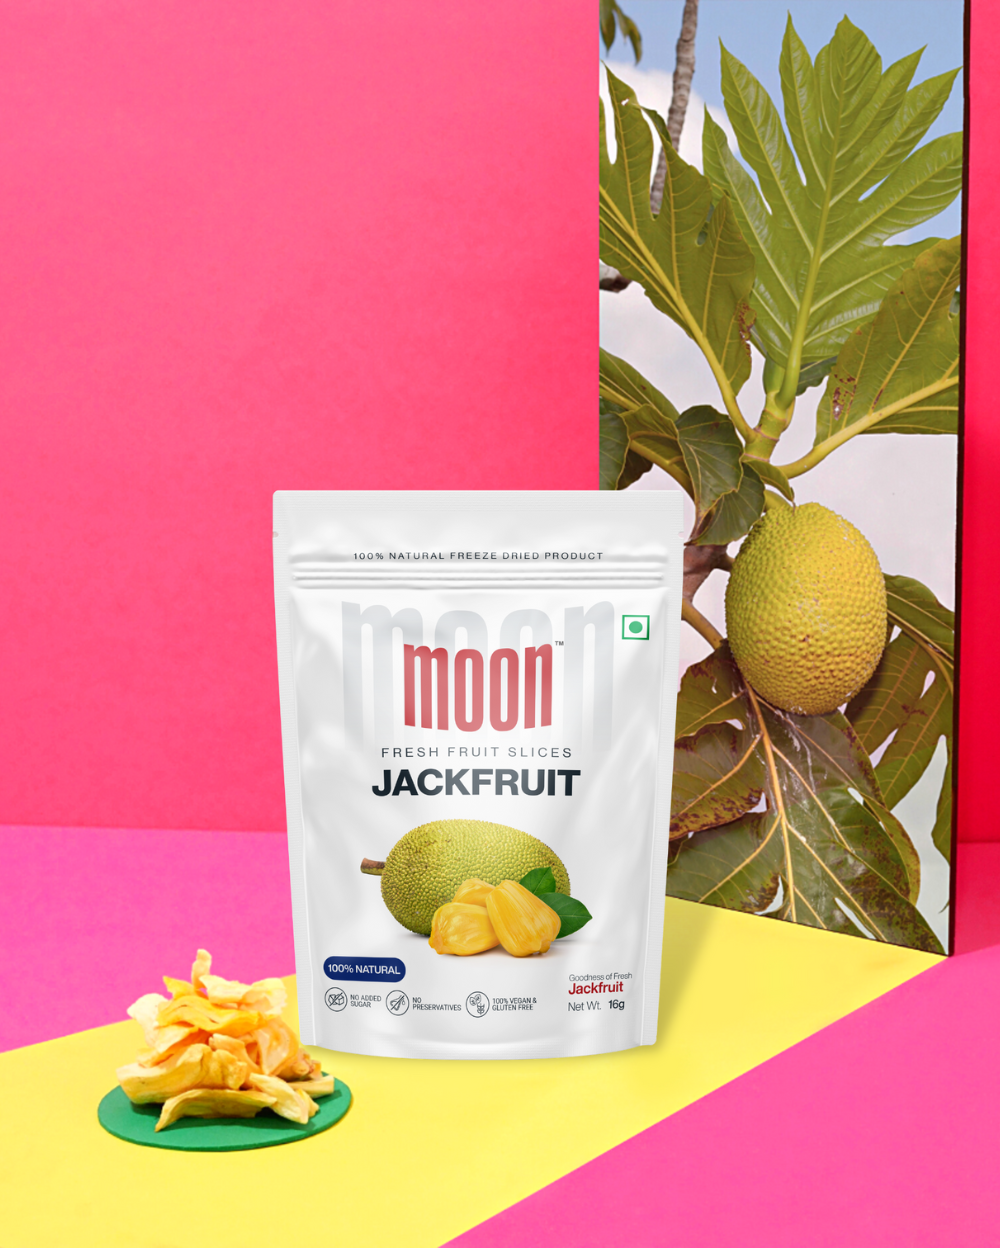 Themoonstoreindia's Moon Freeze Dried Jackfruit on a pink background.